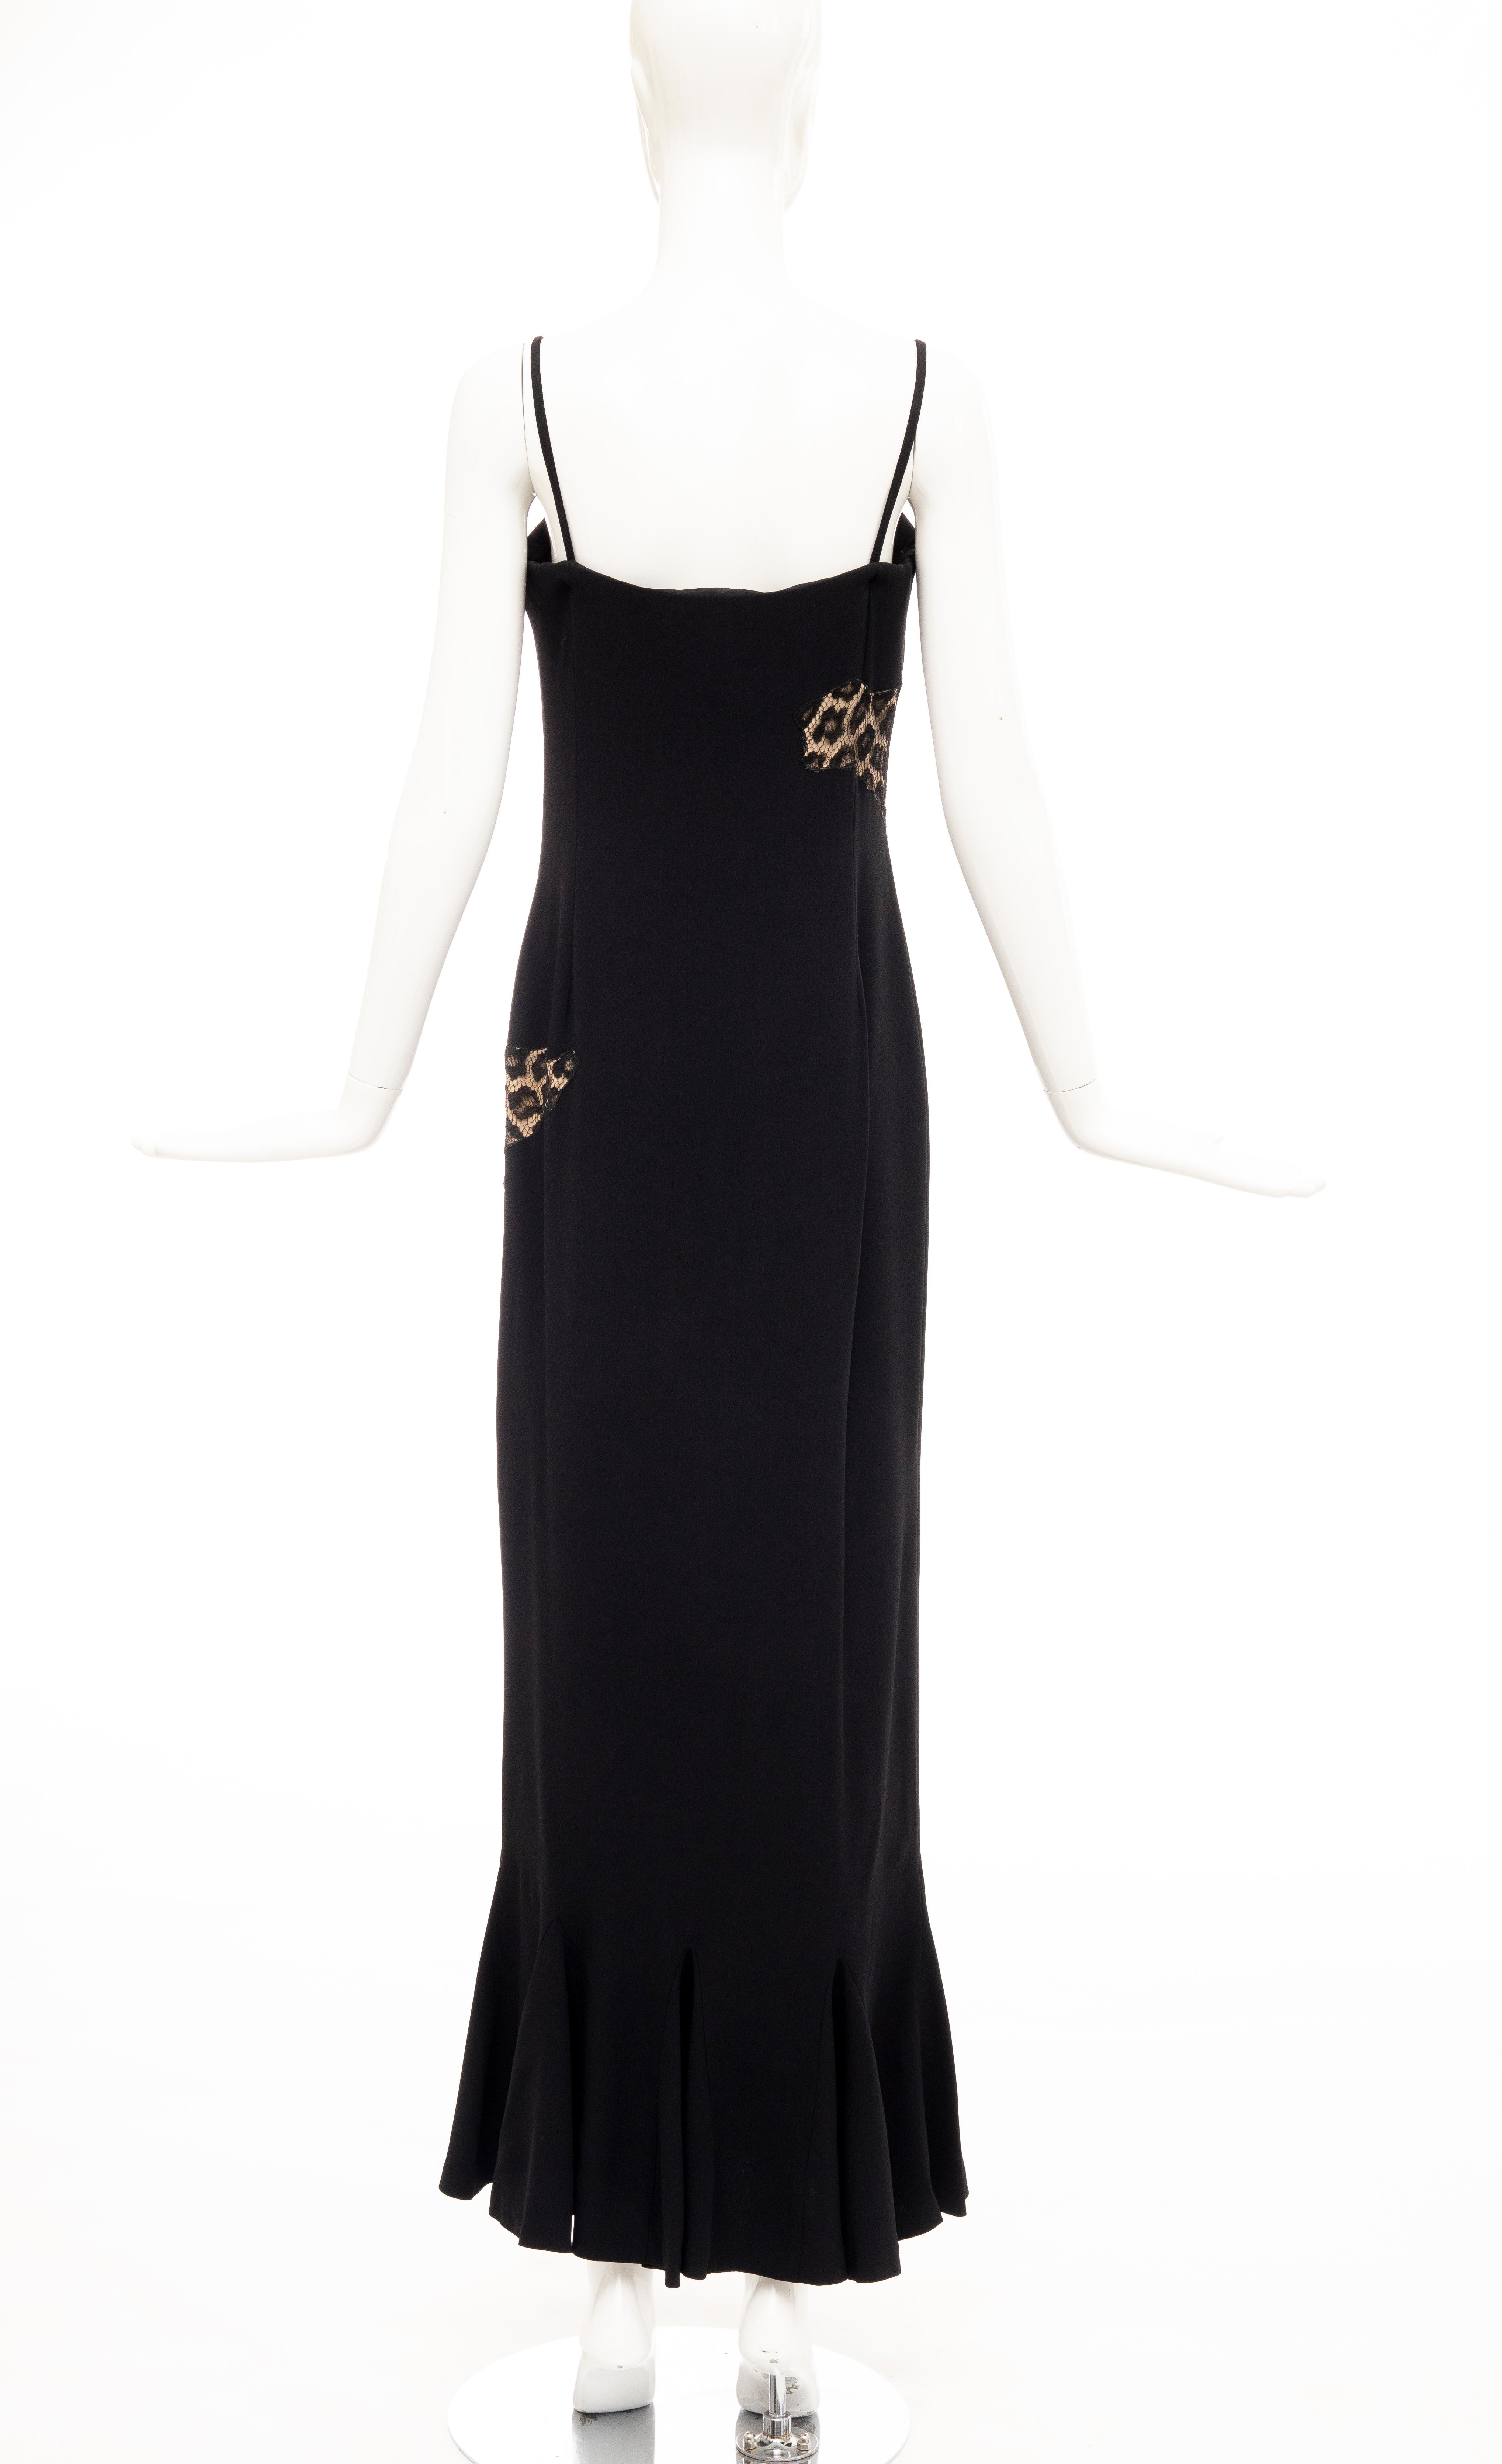 Alexander McQueen Givenchy Couture Black Leopard Lace Evening Dress, Fall 1997 For Sale 1